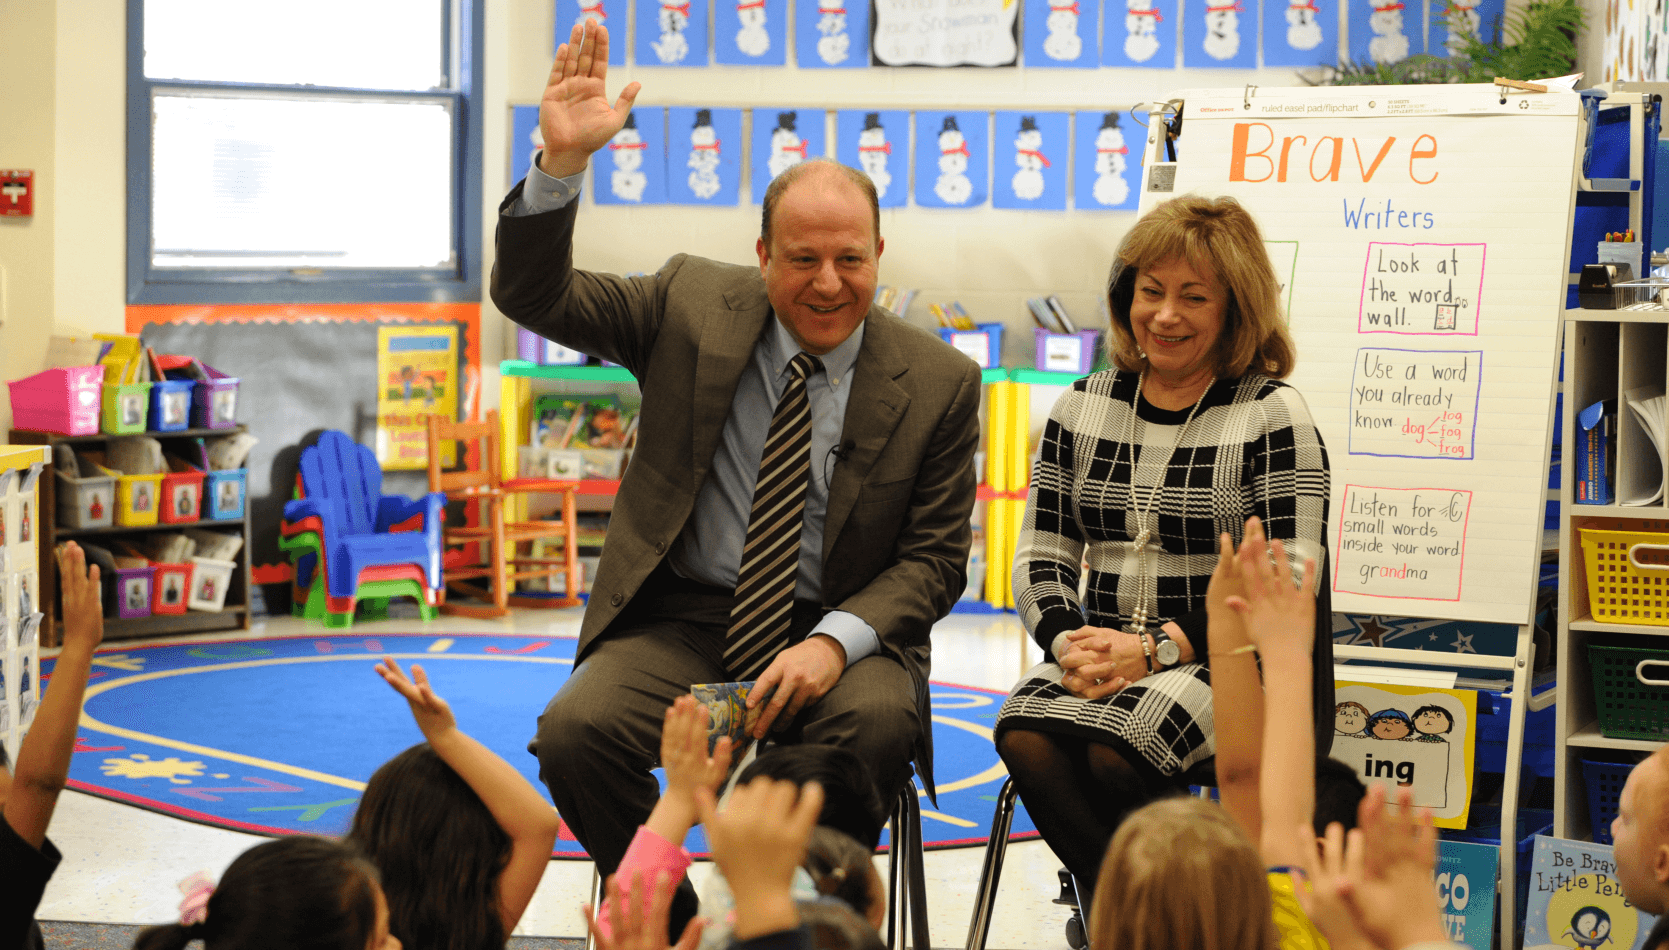 Governor Jared Polis smiles and raises his hand in front of a room of elementary school children. Seated next to him is Lt. Governor Primavera..